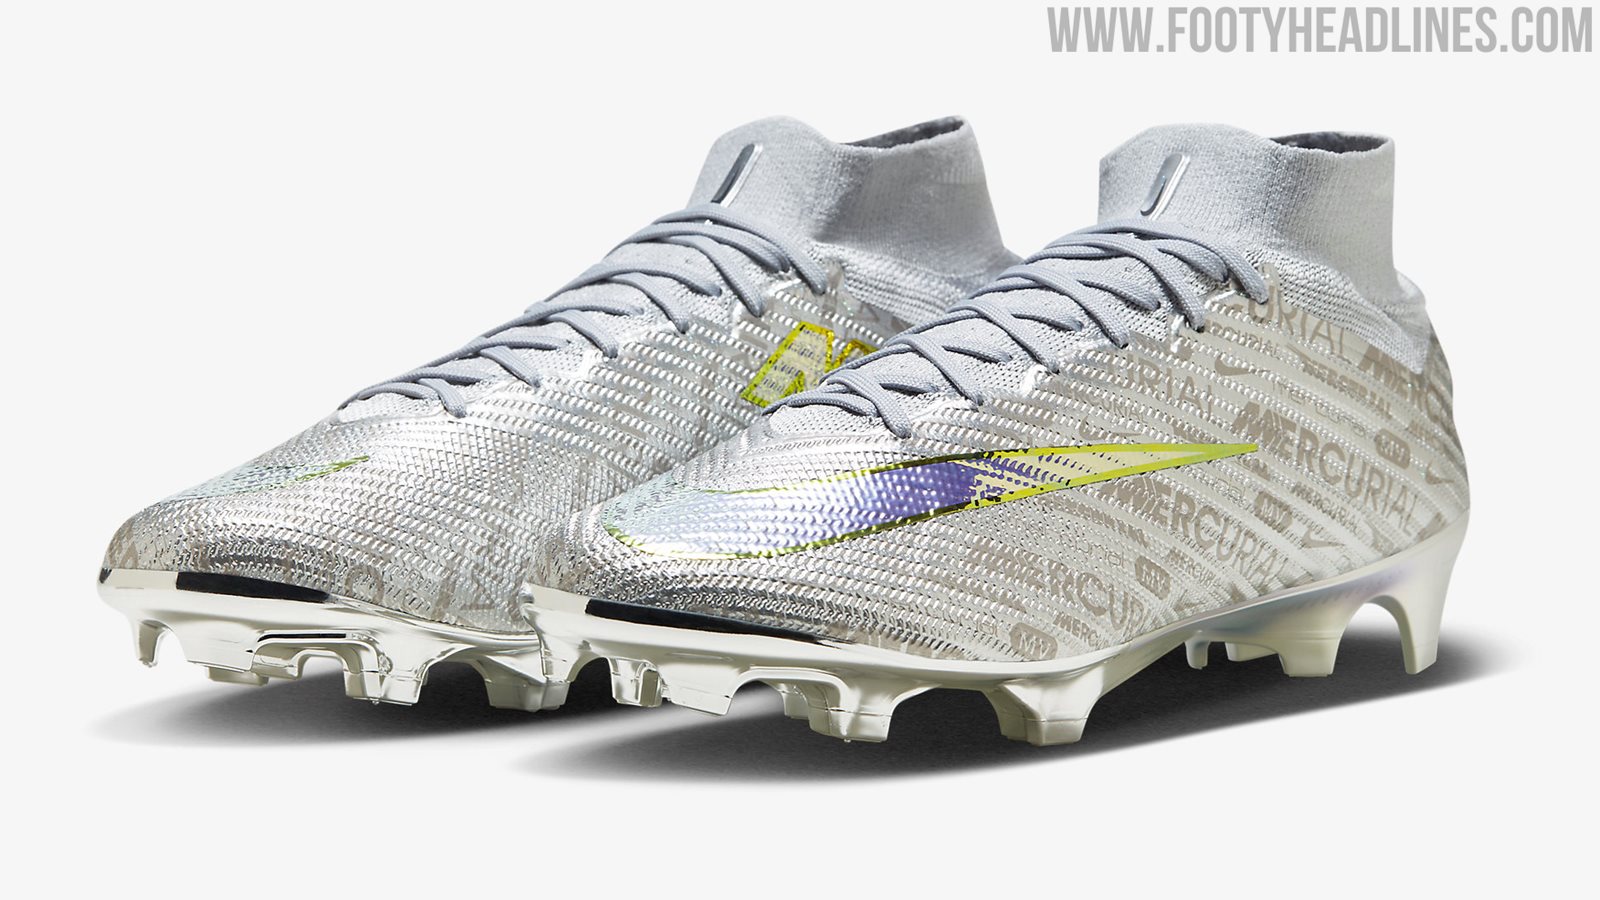 Nike Mercurial Vapor & Superfly 'Disruption' 25 Years Limited-Edition Boots Released - Footy Headlines